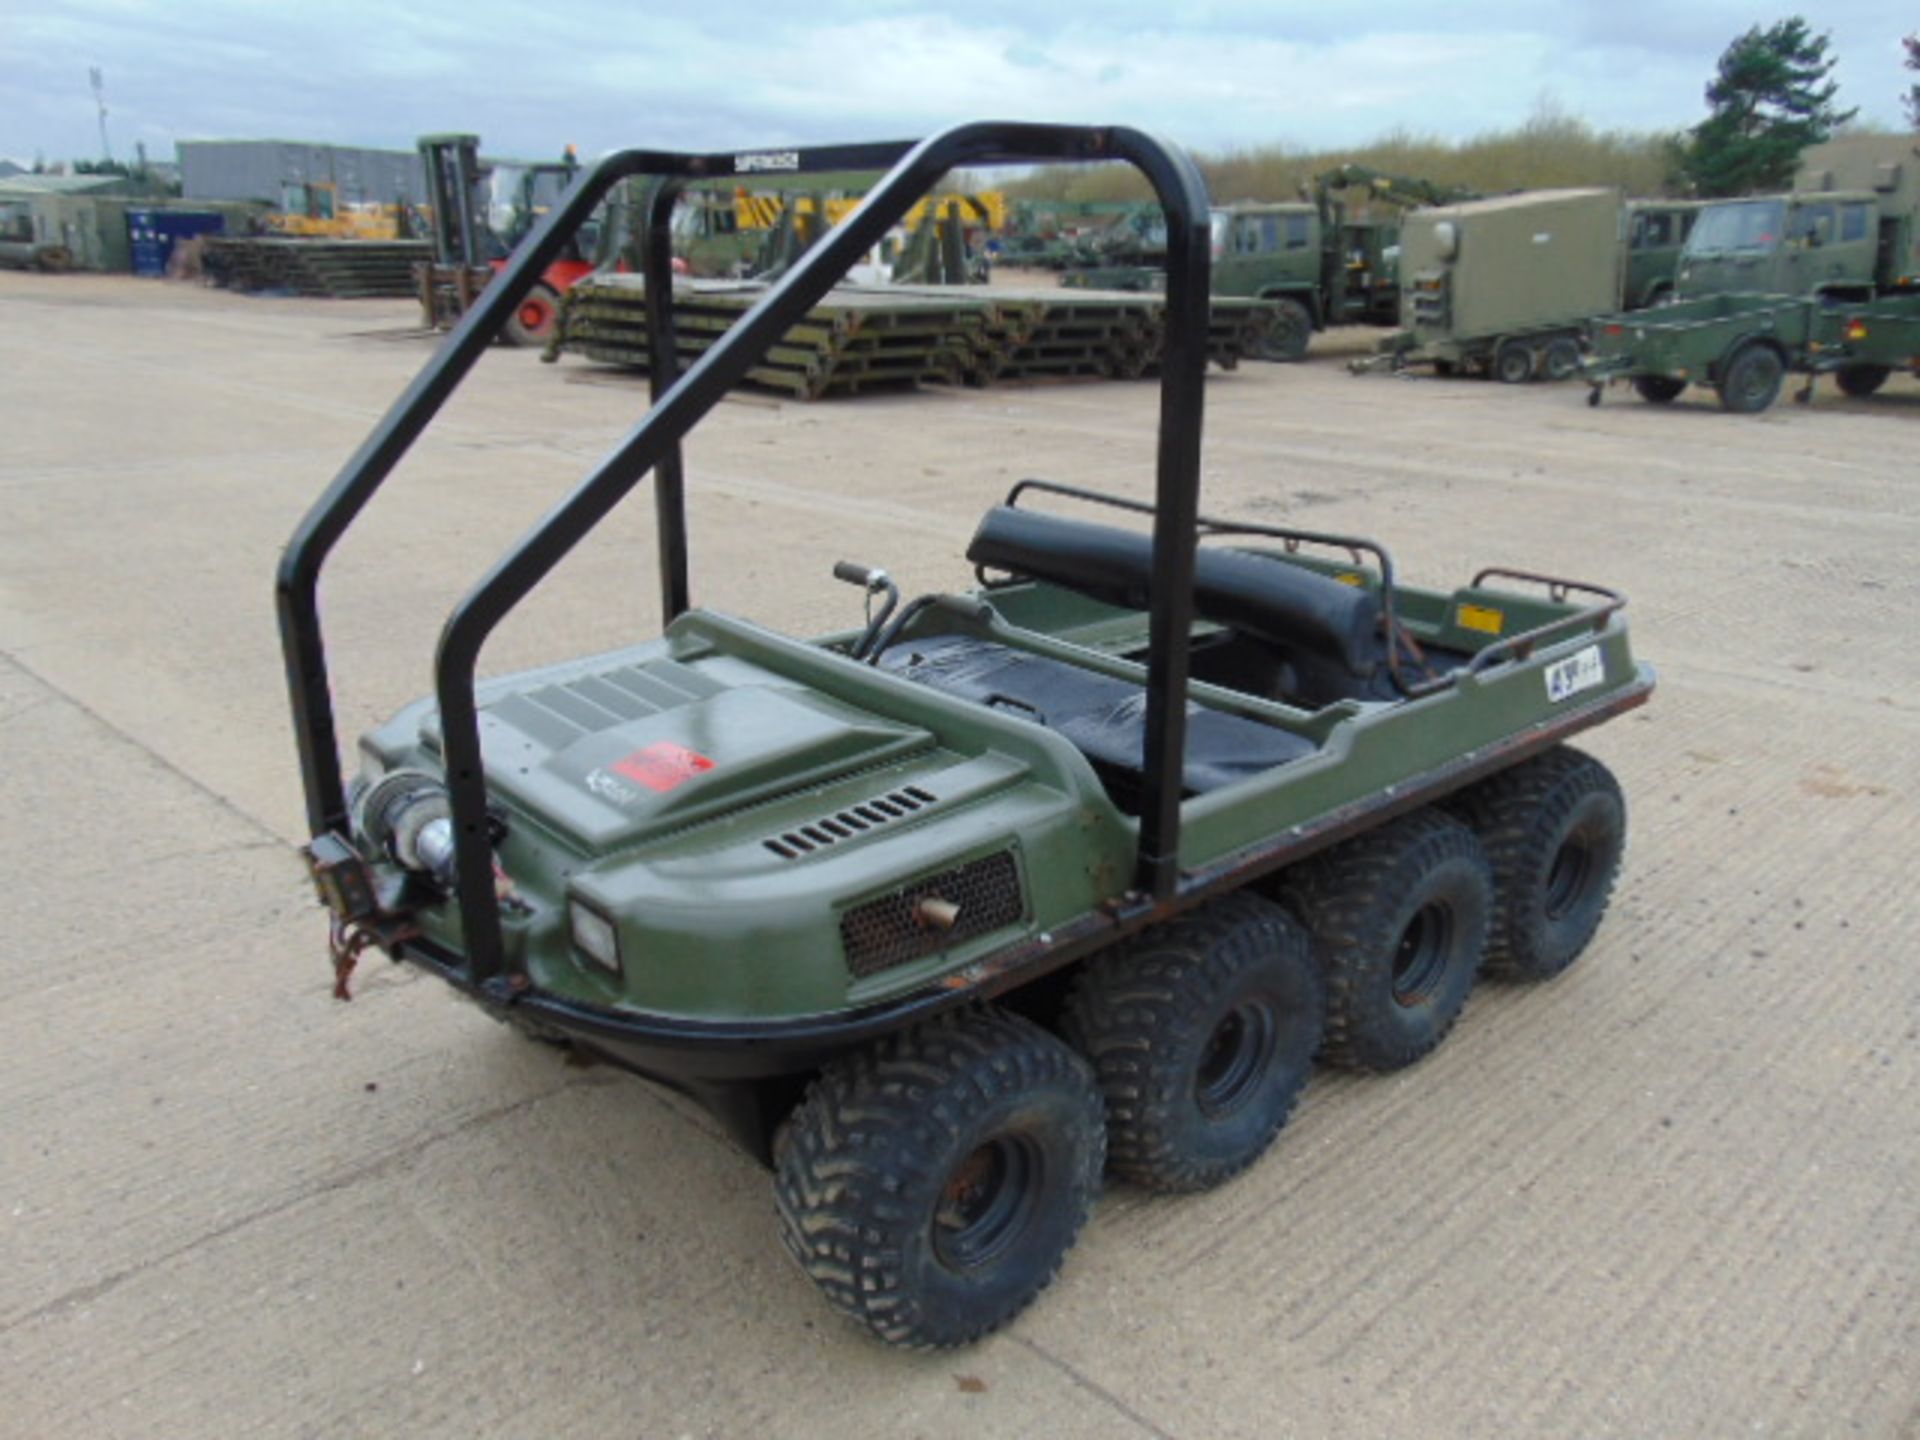 Argocat 8x8 Response Amphibious ATV with Front Mounted Winch - Image 3 of 28